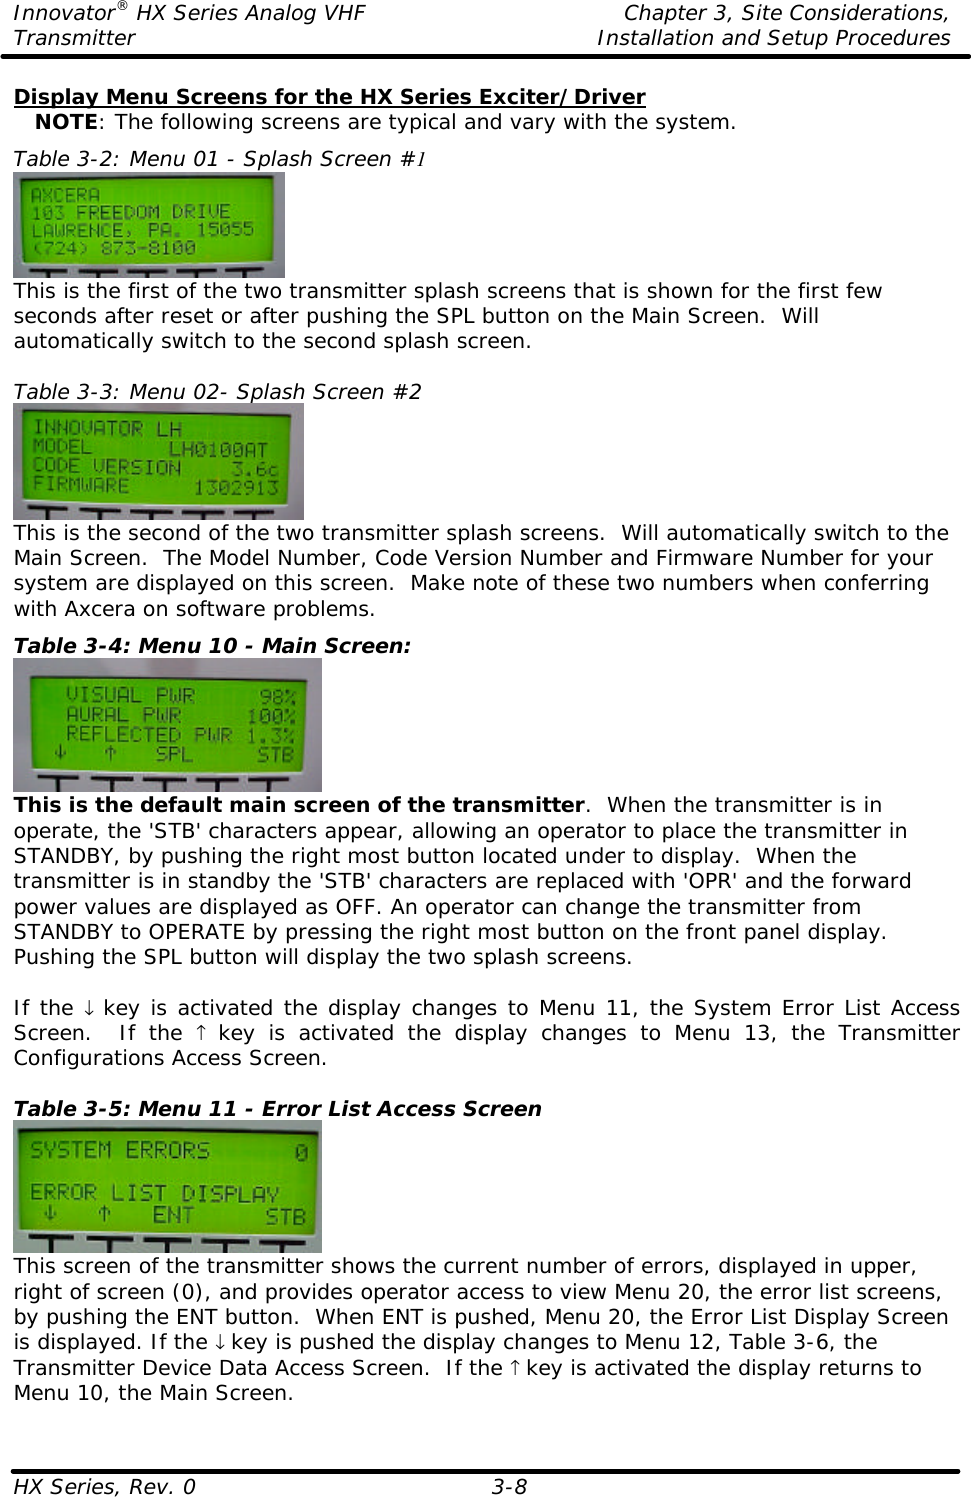 Innovator® HX Series Analog VHF    Chapter 3, Site Considerations, Transmitter Installation and Setup Procedures HX Series, Rev. 0  3-8 Display Menu Screens for the HX Series Exciter/Driver    NOTE: The following screens are typical and vary with the system. Table 3-2: Menu 01 - Splash Screen #1  This is the first of the two transmitter splash screens that is shown for the first few seconds after reset or after pushing the SPL button on the Main Screen.  Will automatically switch to the second splash screen.  Table 3-3: Menu 02- Splash Screen #2  This is the second of the two transmitter splash screens.  Will automatically switch to the Main Screen.  The Model Number, Code Version Number and Firmware Number for your system are displayed on this screen.  Make note of these two numbers when conferring with Axcera on software problems. Table 3-4: Menu 10 - Main Screen:  This is the default main screen of the transmitter.  When the transmitter is in operate, the &apos;STB&apos; characters appear, allowing an operator to place the transmitter in STANDBY, by pushing the right most button located under to display.  When the transmitter is in standby the &apos;STB&apos; characters are replaced with &apos;OPR&apos; and the forward power values are displayed as OFF. An operator can change the transmitter from STANDBY to OPERATE by pressing the right most button on the front panel display.  Pushing the SPL button will display the two splash screens.  If the ↓ key is activated the display changes to Menu 11, the System Error List Access Screen.  If the ↑ key is activated the display changes to Menu 13, the Transmitter Configurations Access Screen.  Table 3-5: Menu 11 - Error List Access Screen  This screen of the transmitter shows the current number of errors, displayed in upper, right of screen (0), and provides operator access to view Menu 20, the error list screens, by pushing the ENT button.  When ENT is pushed, Menu 20, the Error List Display Screen is displayed. If the ↓ key is pushed the display changes to Menu 12, Table 3-6, the Transmitter Device Data Access Screen.  If the ↑ key is activated the display returns to Menu 10, the Main Screen.  